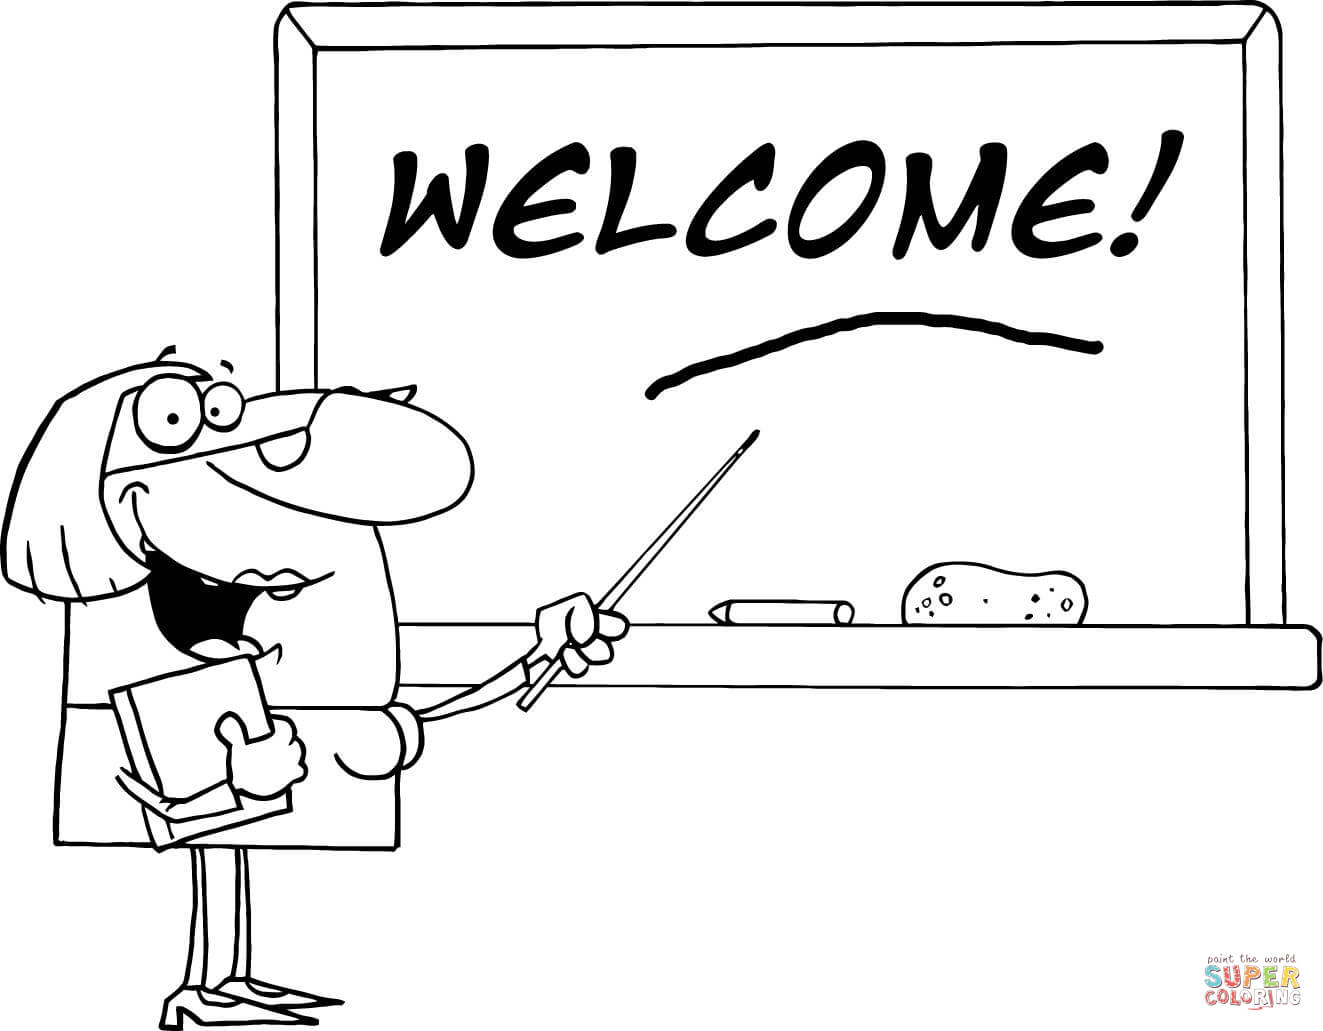 Welcome Coloring Pages A Woman School Teacher With A Pointer Displayed On Chalk Board Text